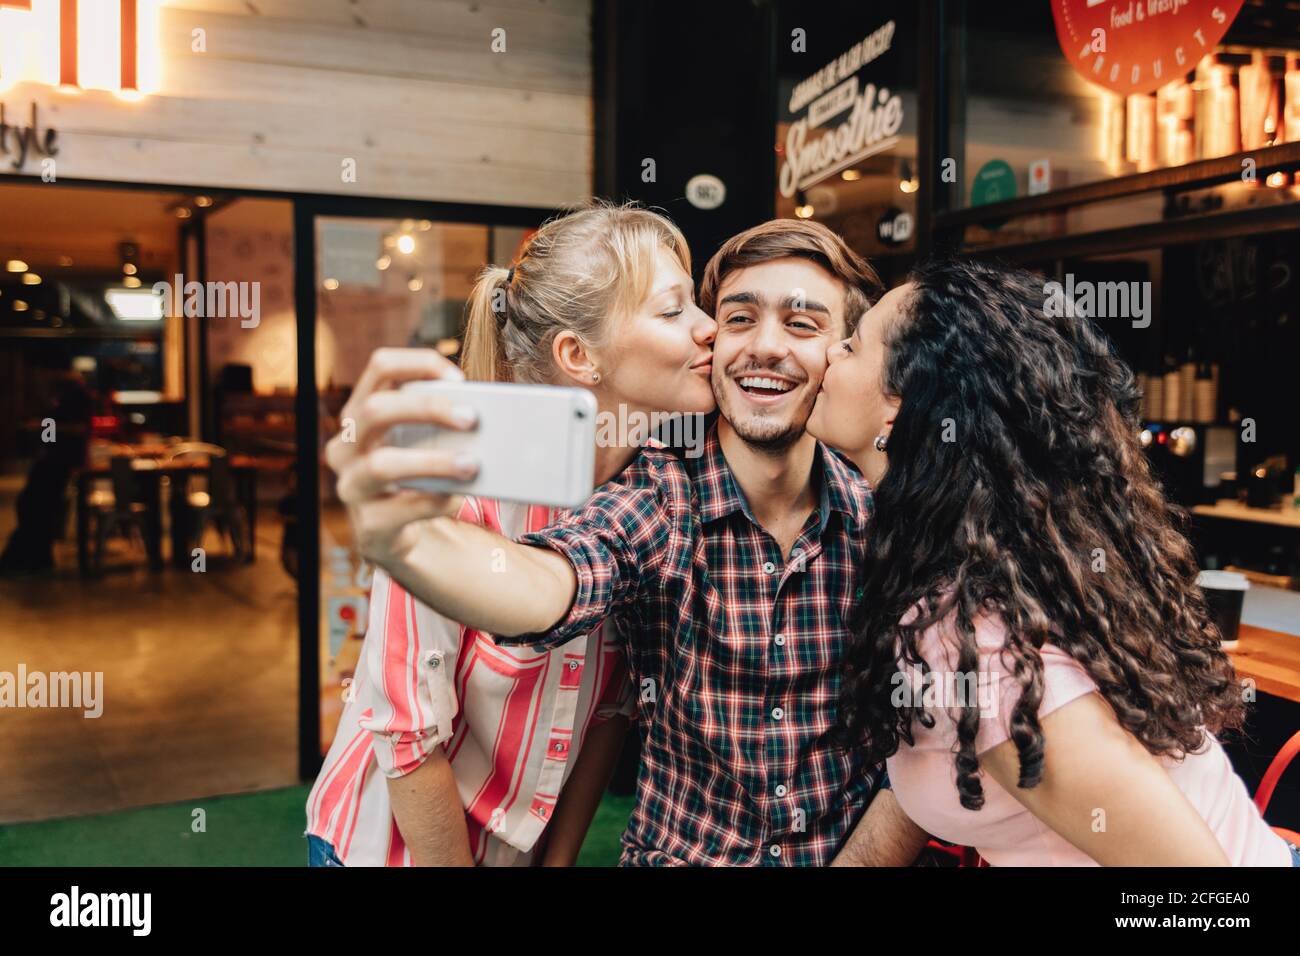 girls kissing a young man taking a selfie Stock Photo